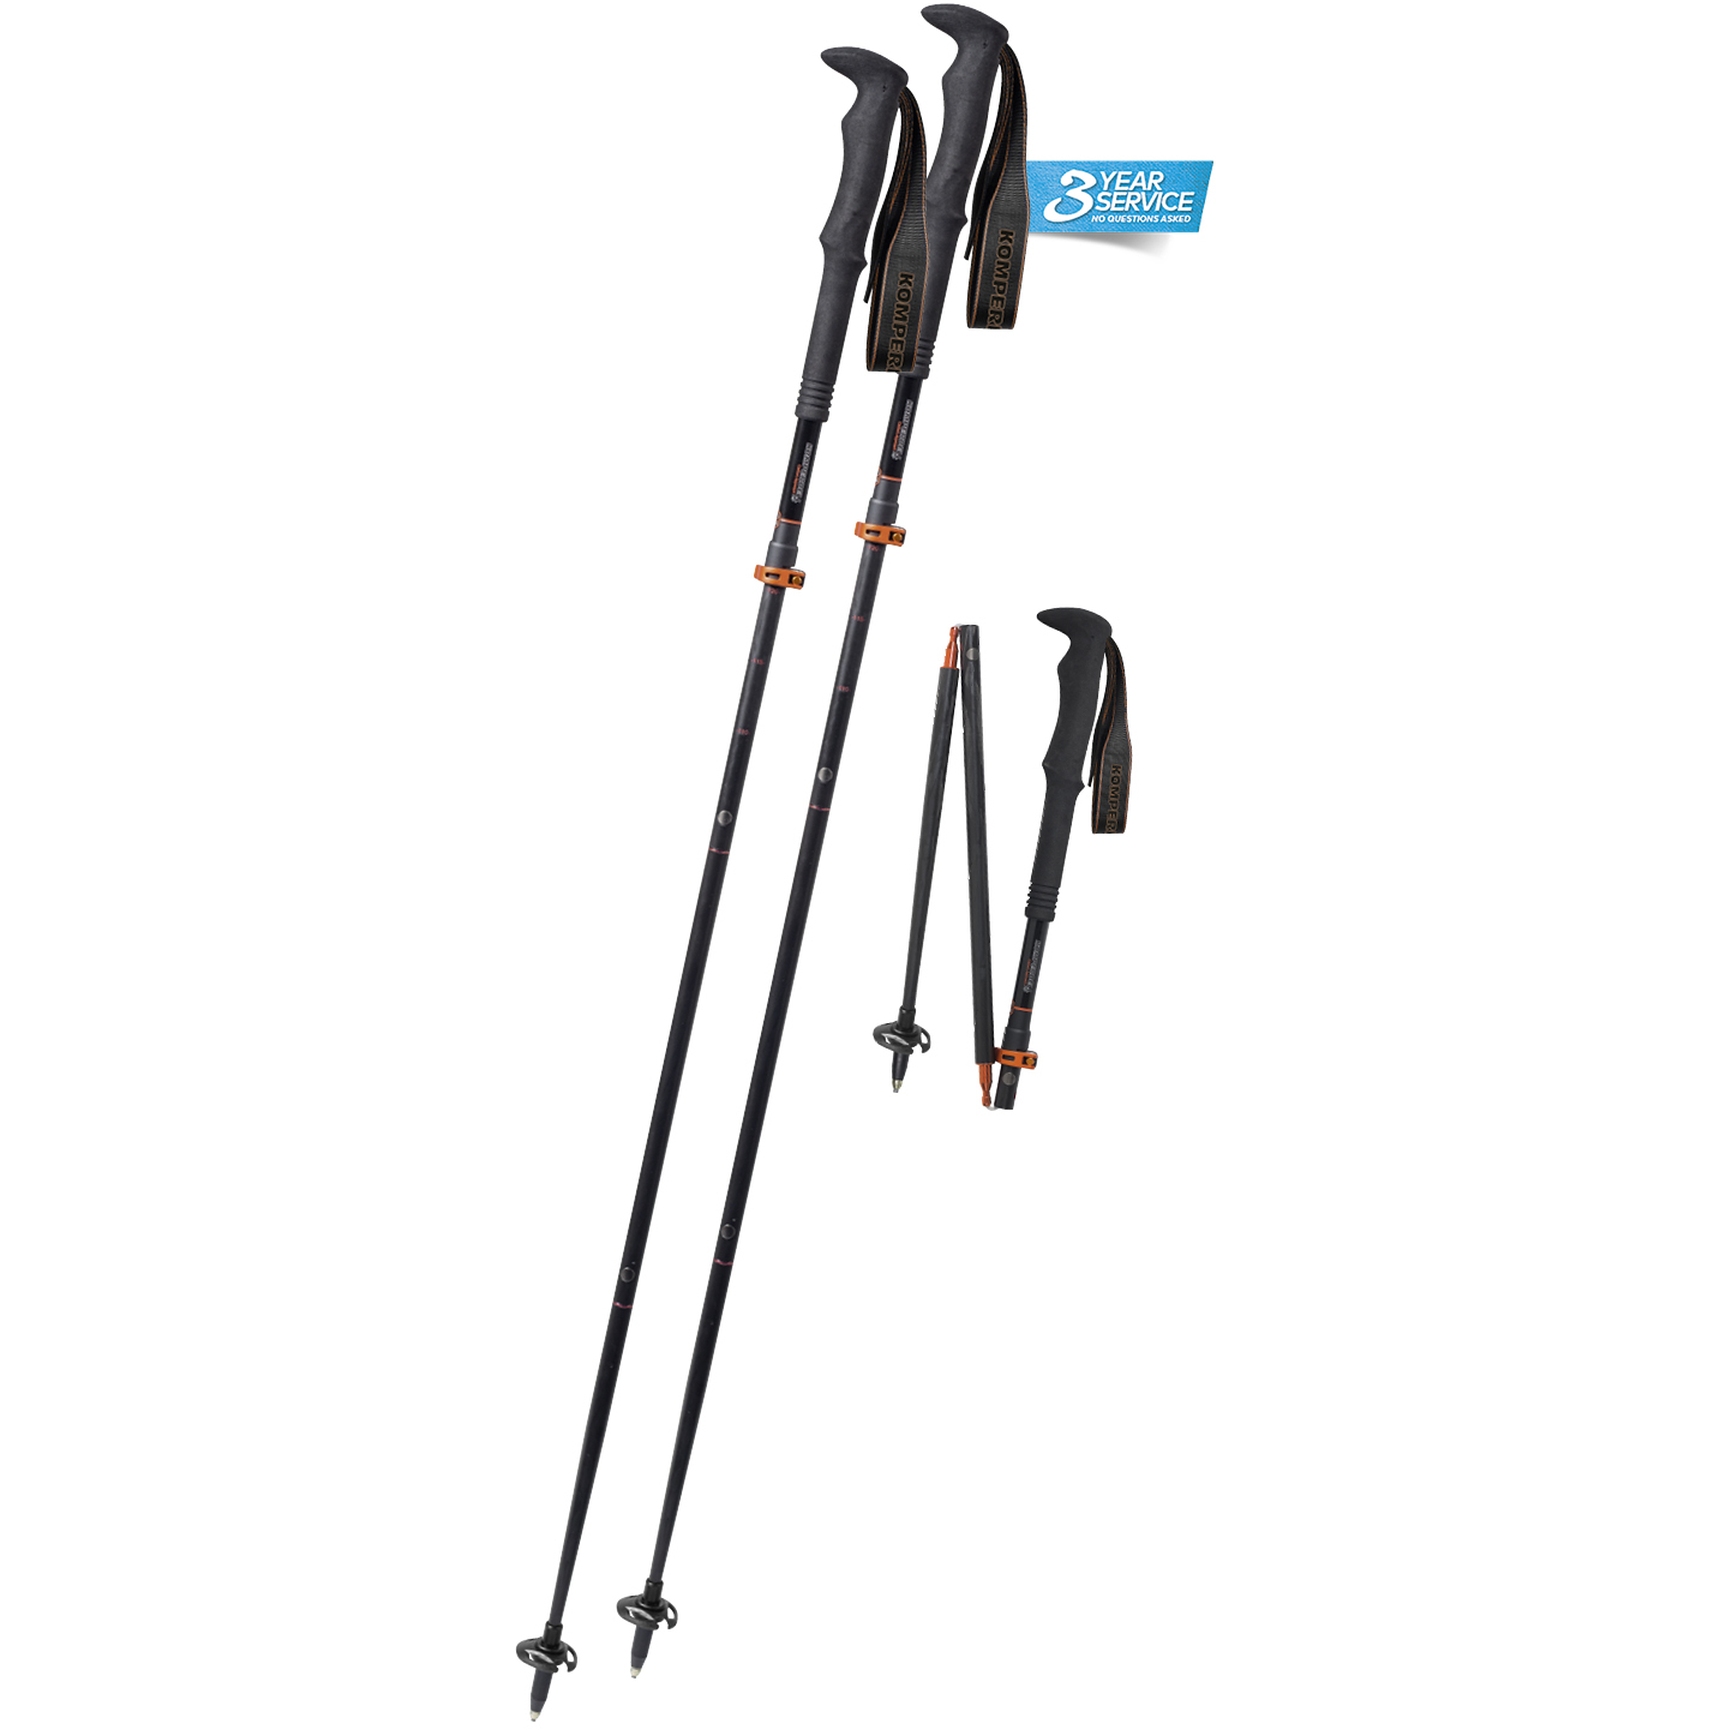 Image of Komperdell Carbon FXP.4 Approach Vario Compact Trekking Poles (Pair) - black/red